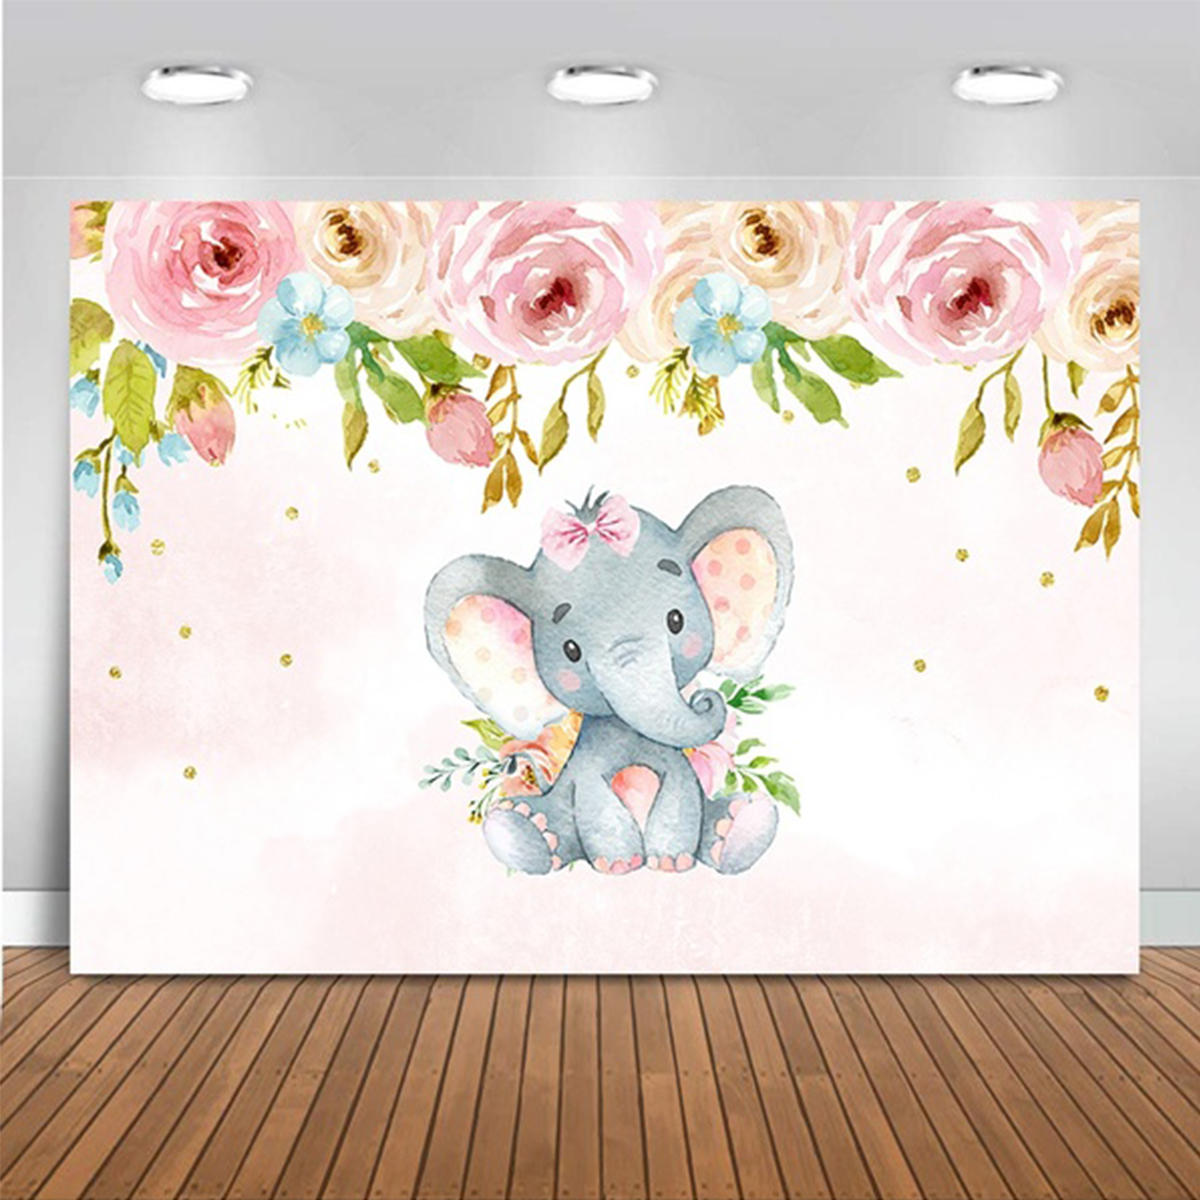 2 Types Cute Elephant Shower Backdrop Birthday Party Baby Photography Background Cloth Studio Props